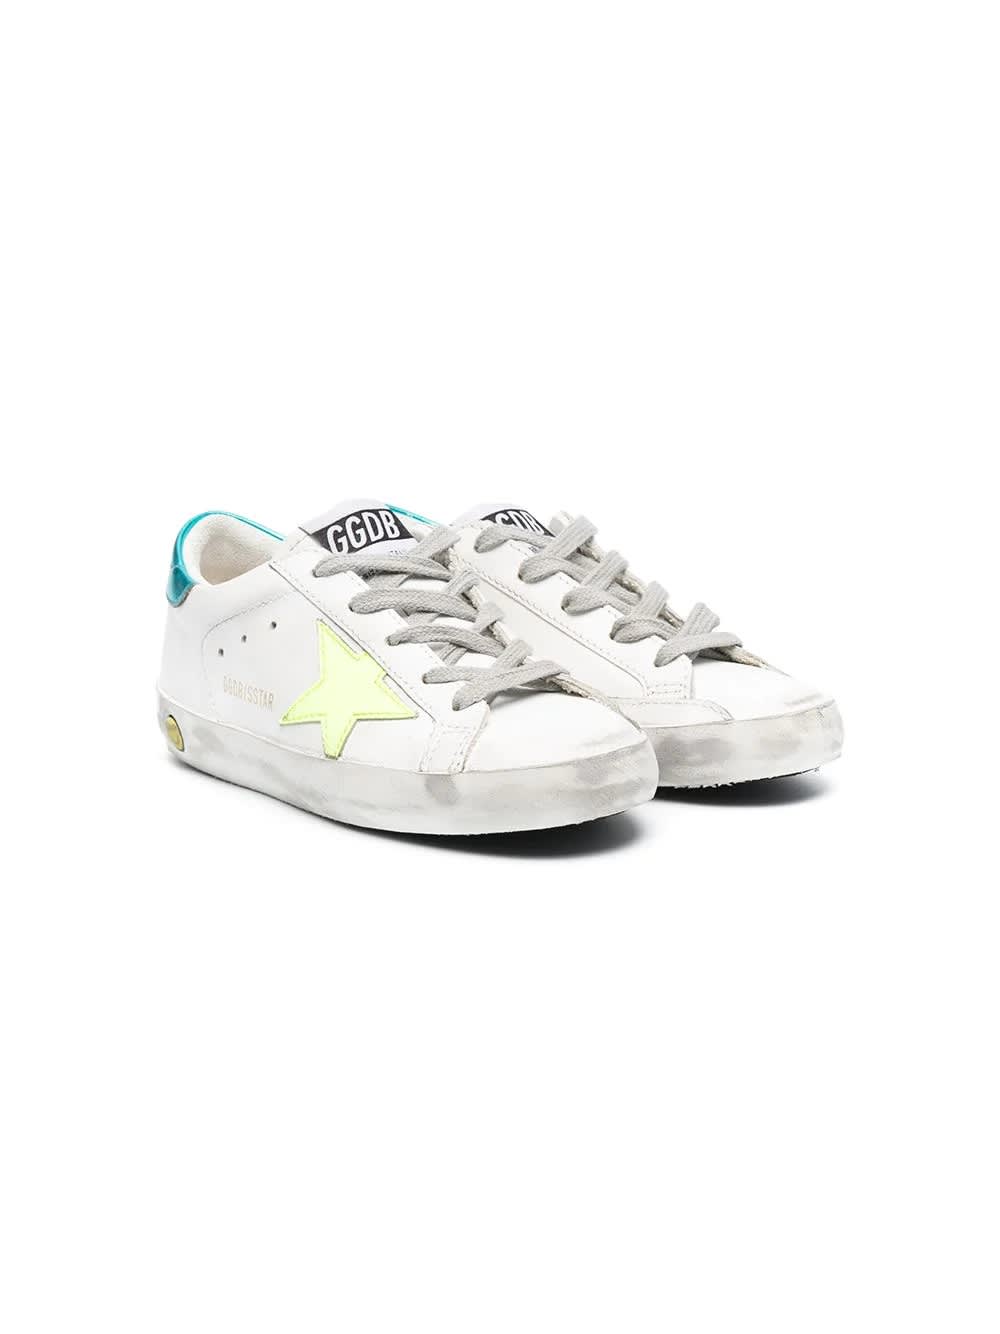 Buy Golden Goose Yellow Retro Turquoise Star Sneakers online, shop Golden Goose shoes with free shipping